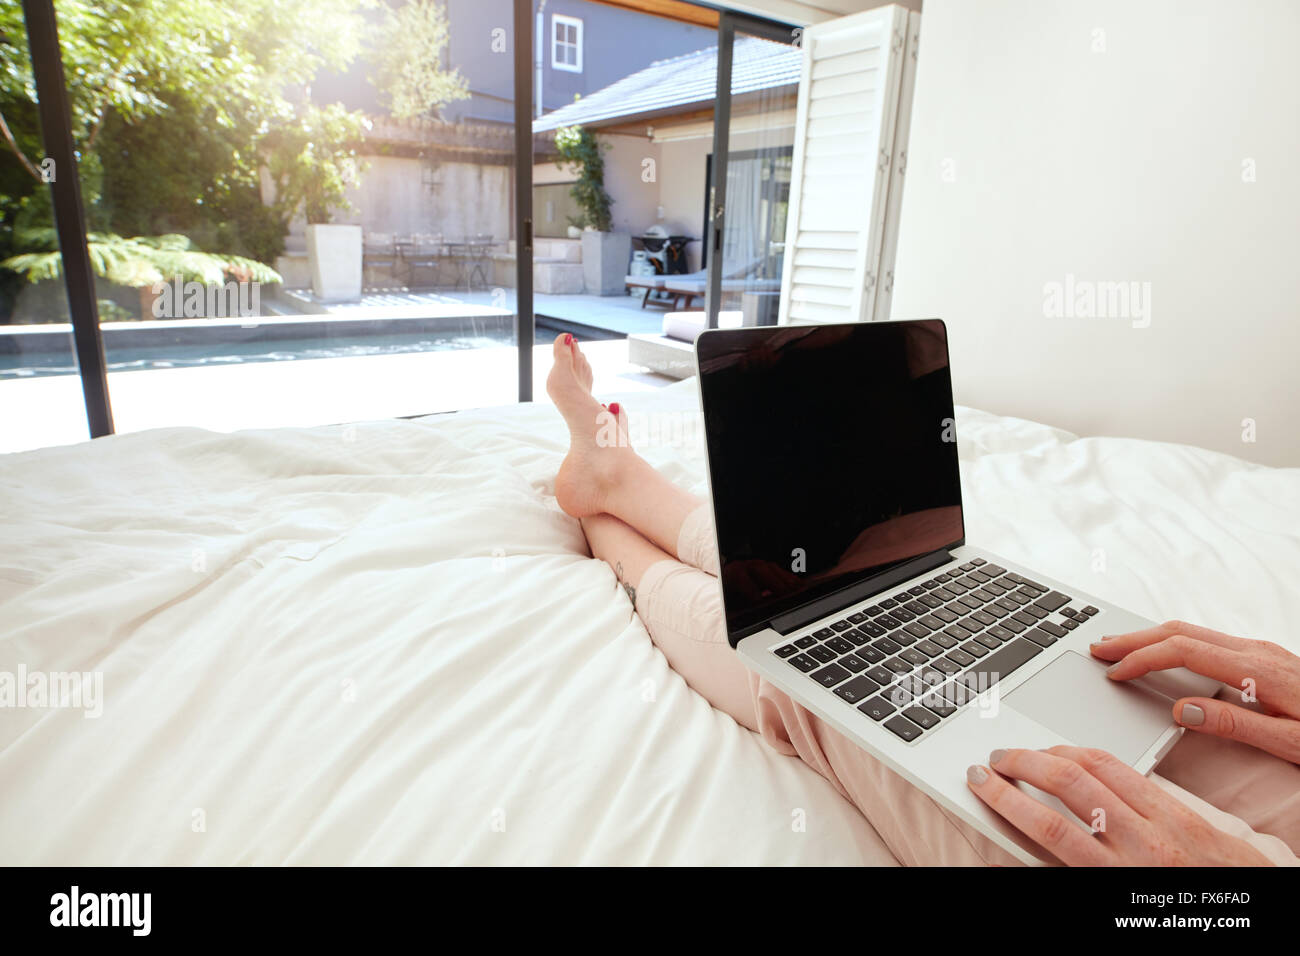 Closeup image of woman relaxing in bedroom and surfing internet on her laptop. Woman sitting on bed and working on her laptop co Stock Photo